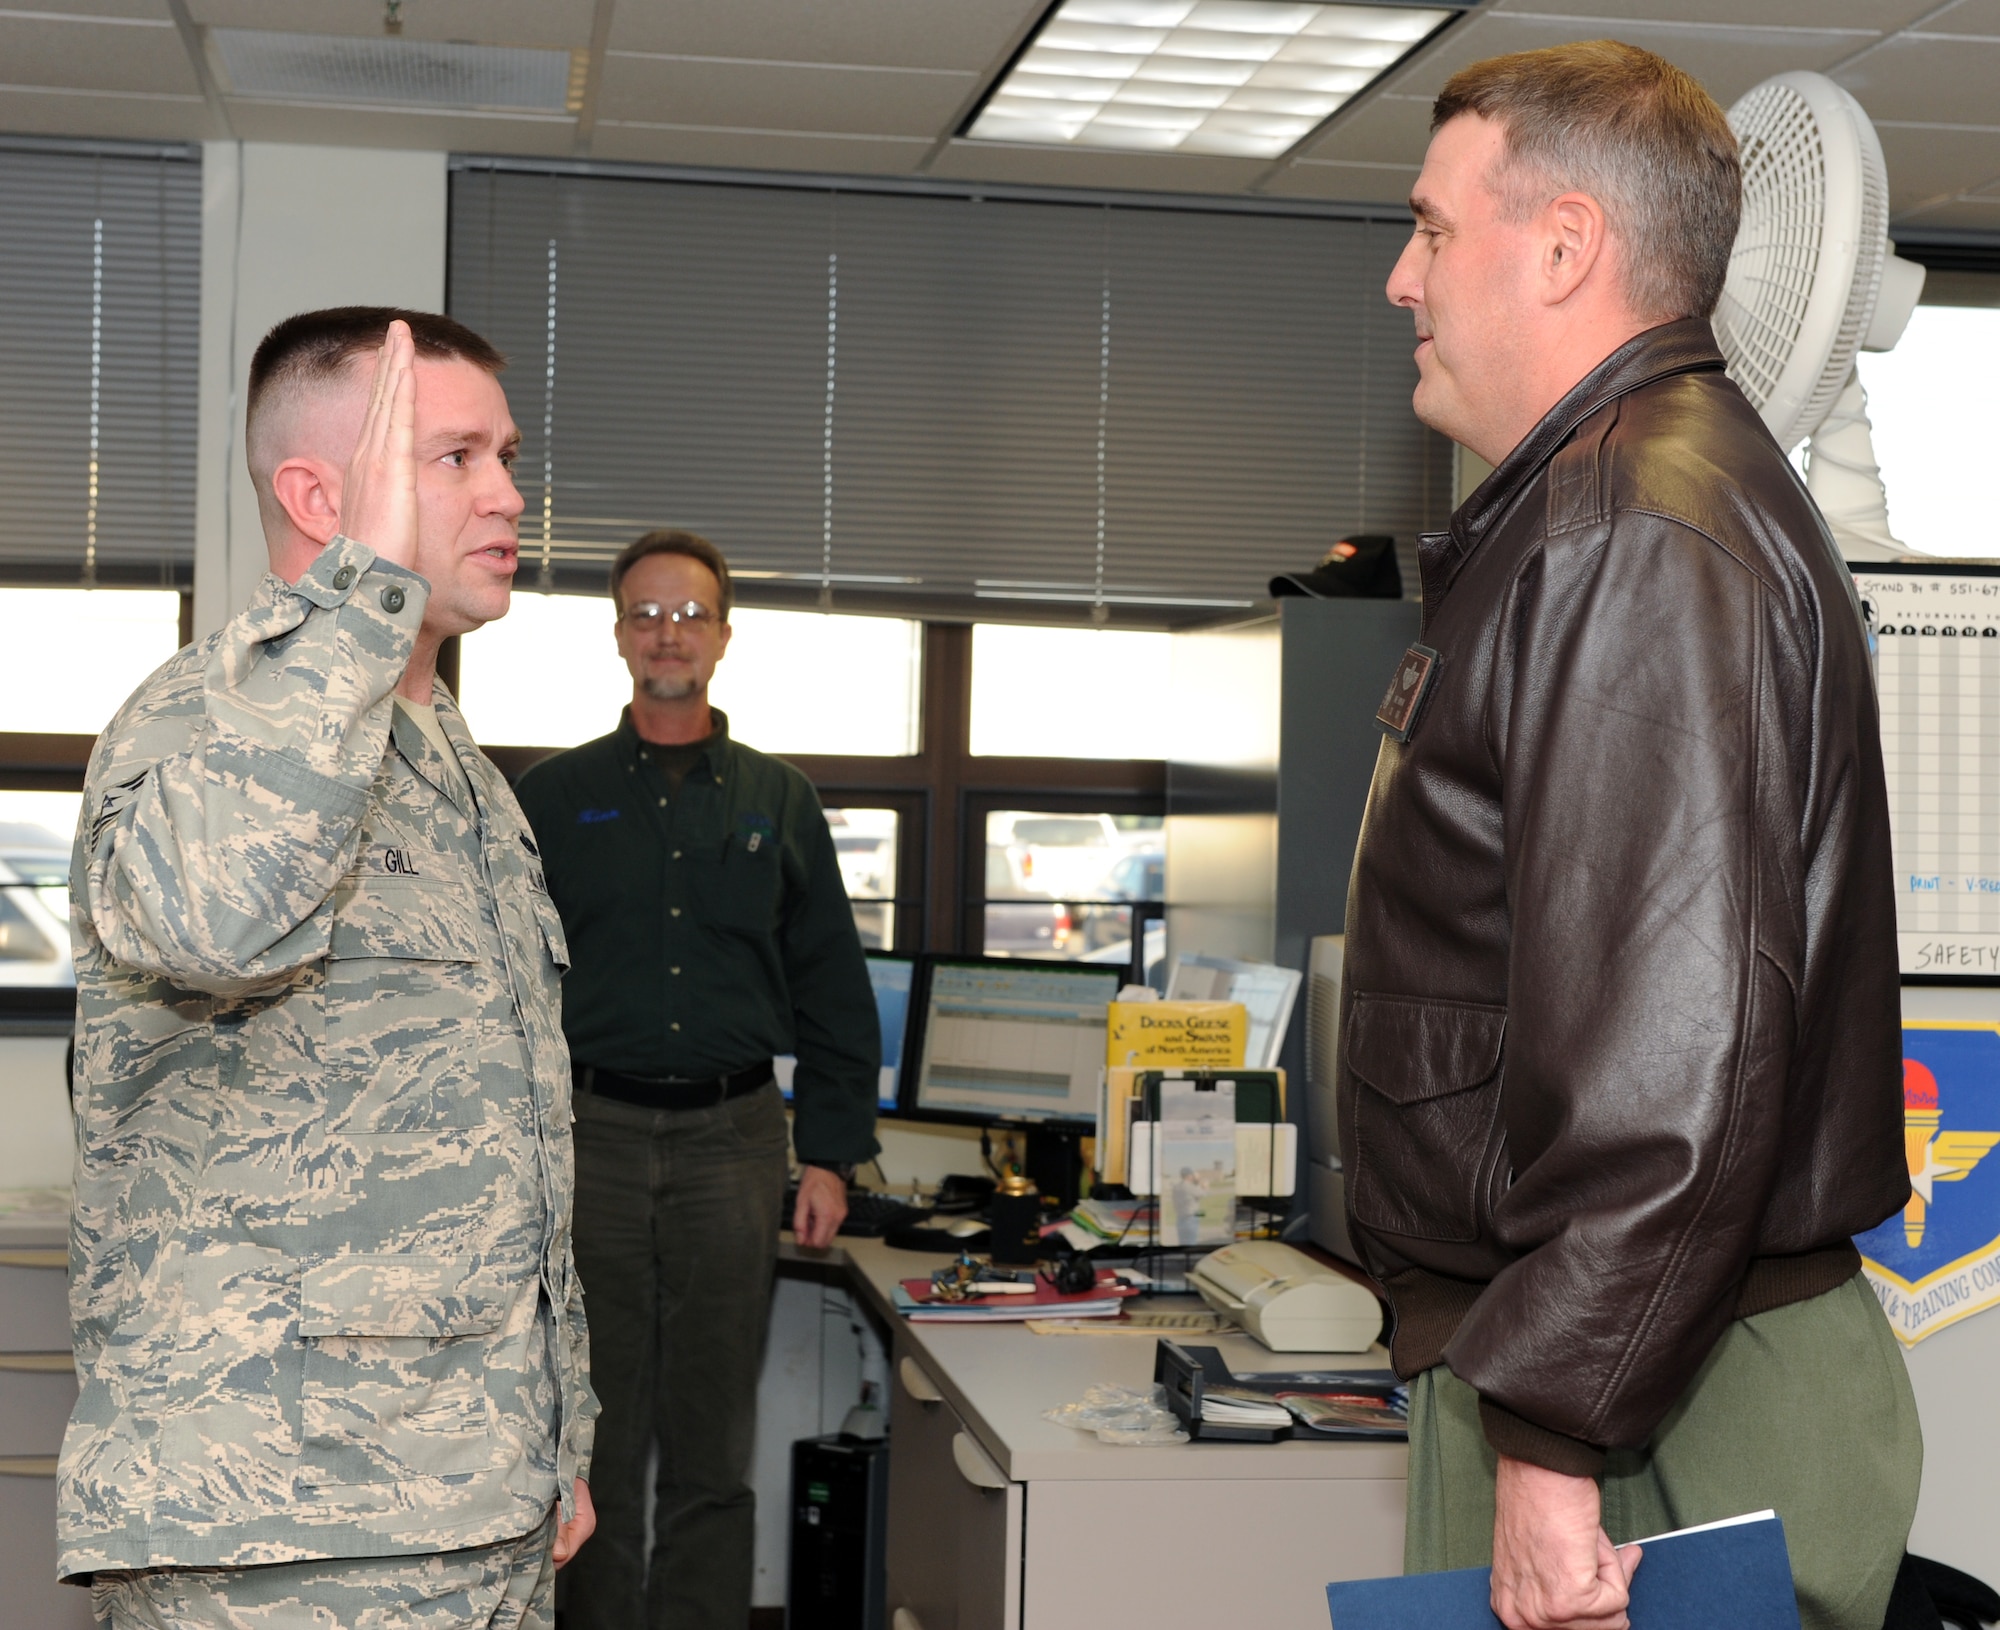 Col. Mike Minihan (right), 19th Airlift Wing commander, administers the enlisted oath to Tech. Sgt. Christopher Gill, 19th AW Safety Office, immediately before he was promoted to master sergeant through the Stripes for Exceptional Performers program Jan. 5, 2011, at Little Rock Air Force Base, Ark. (U.S. Air Force photo by Airman 1st Class Ellora Stewart)